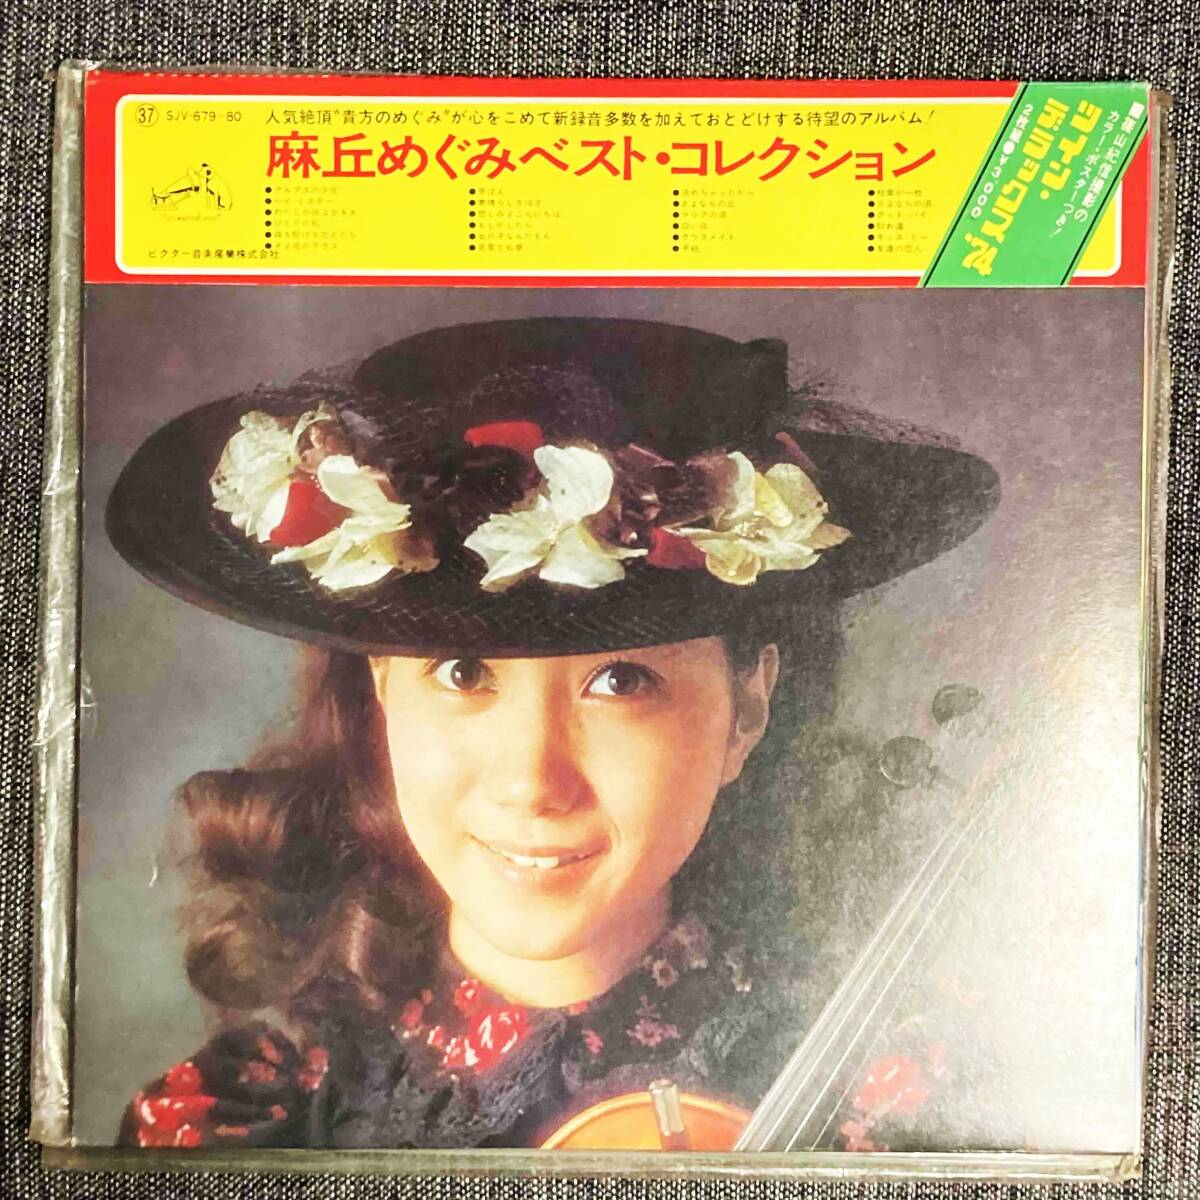 LP record with belt 2LP Asaoka Megumi the best collection . mountain . confidence photographing. color * poster attaching see opening jacket liner twin Deluxe 74 year 